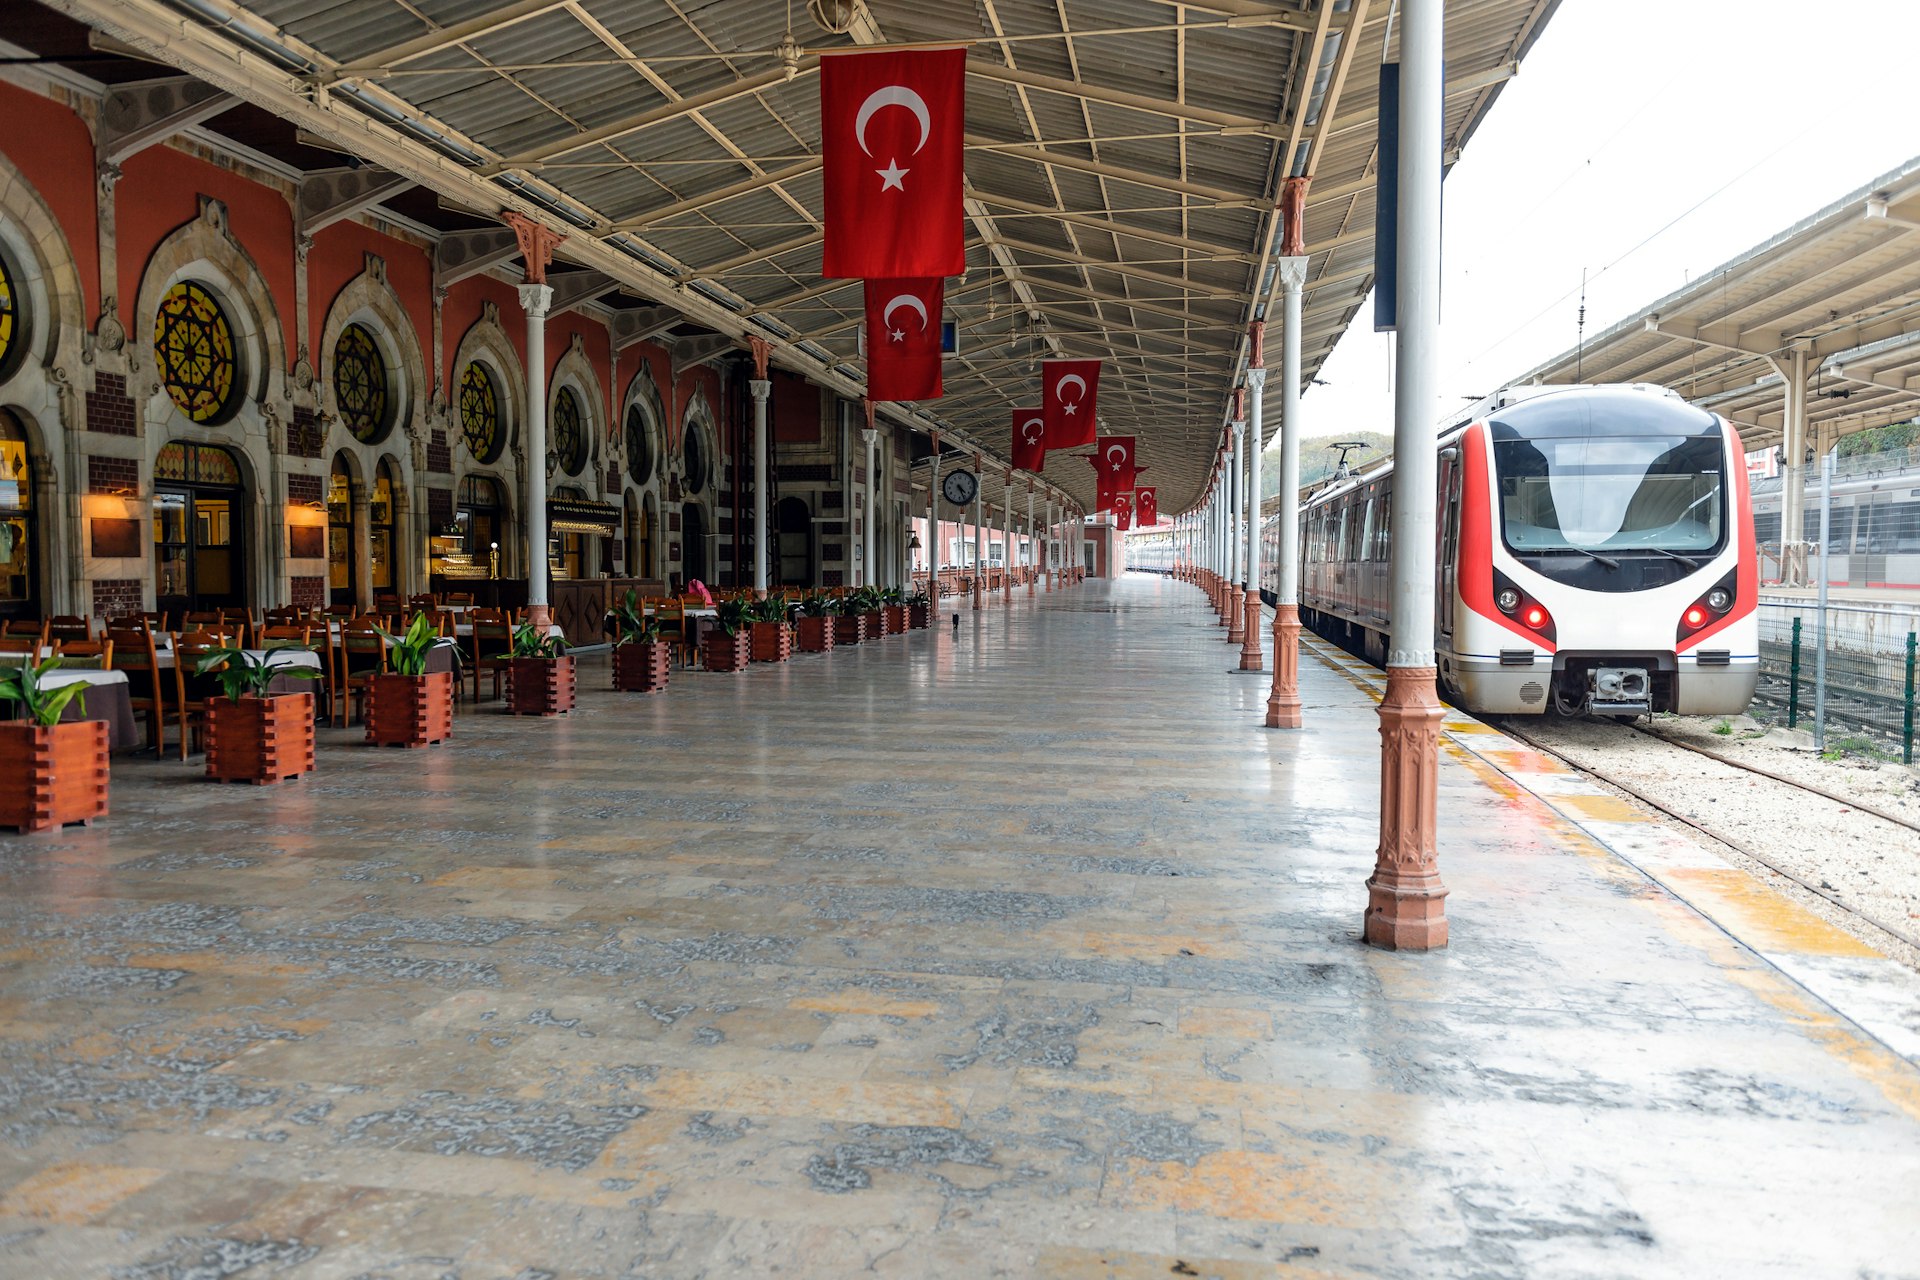 An ornate station platform with Turkish flags hanging from the ceiling 